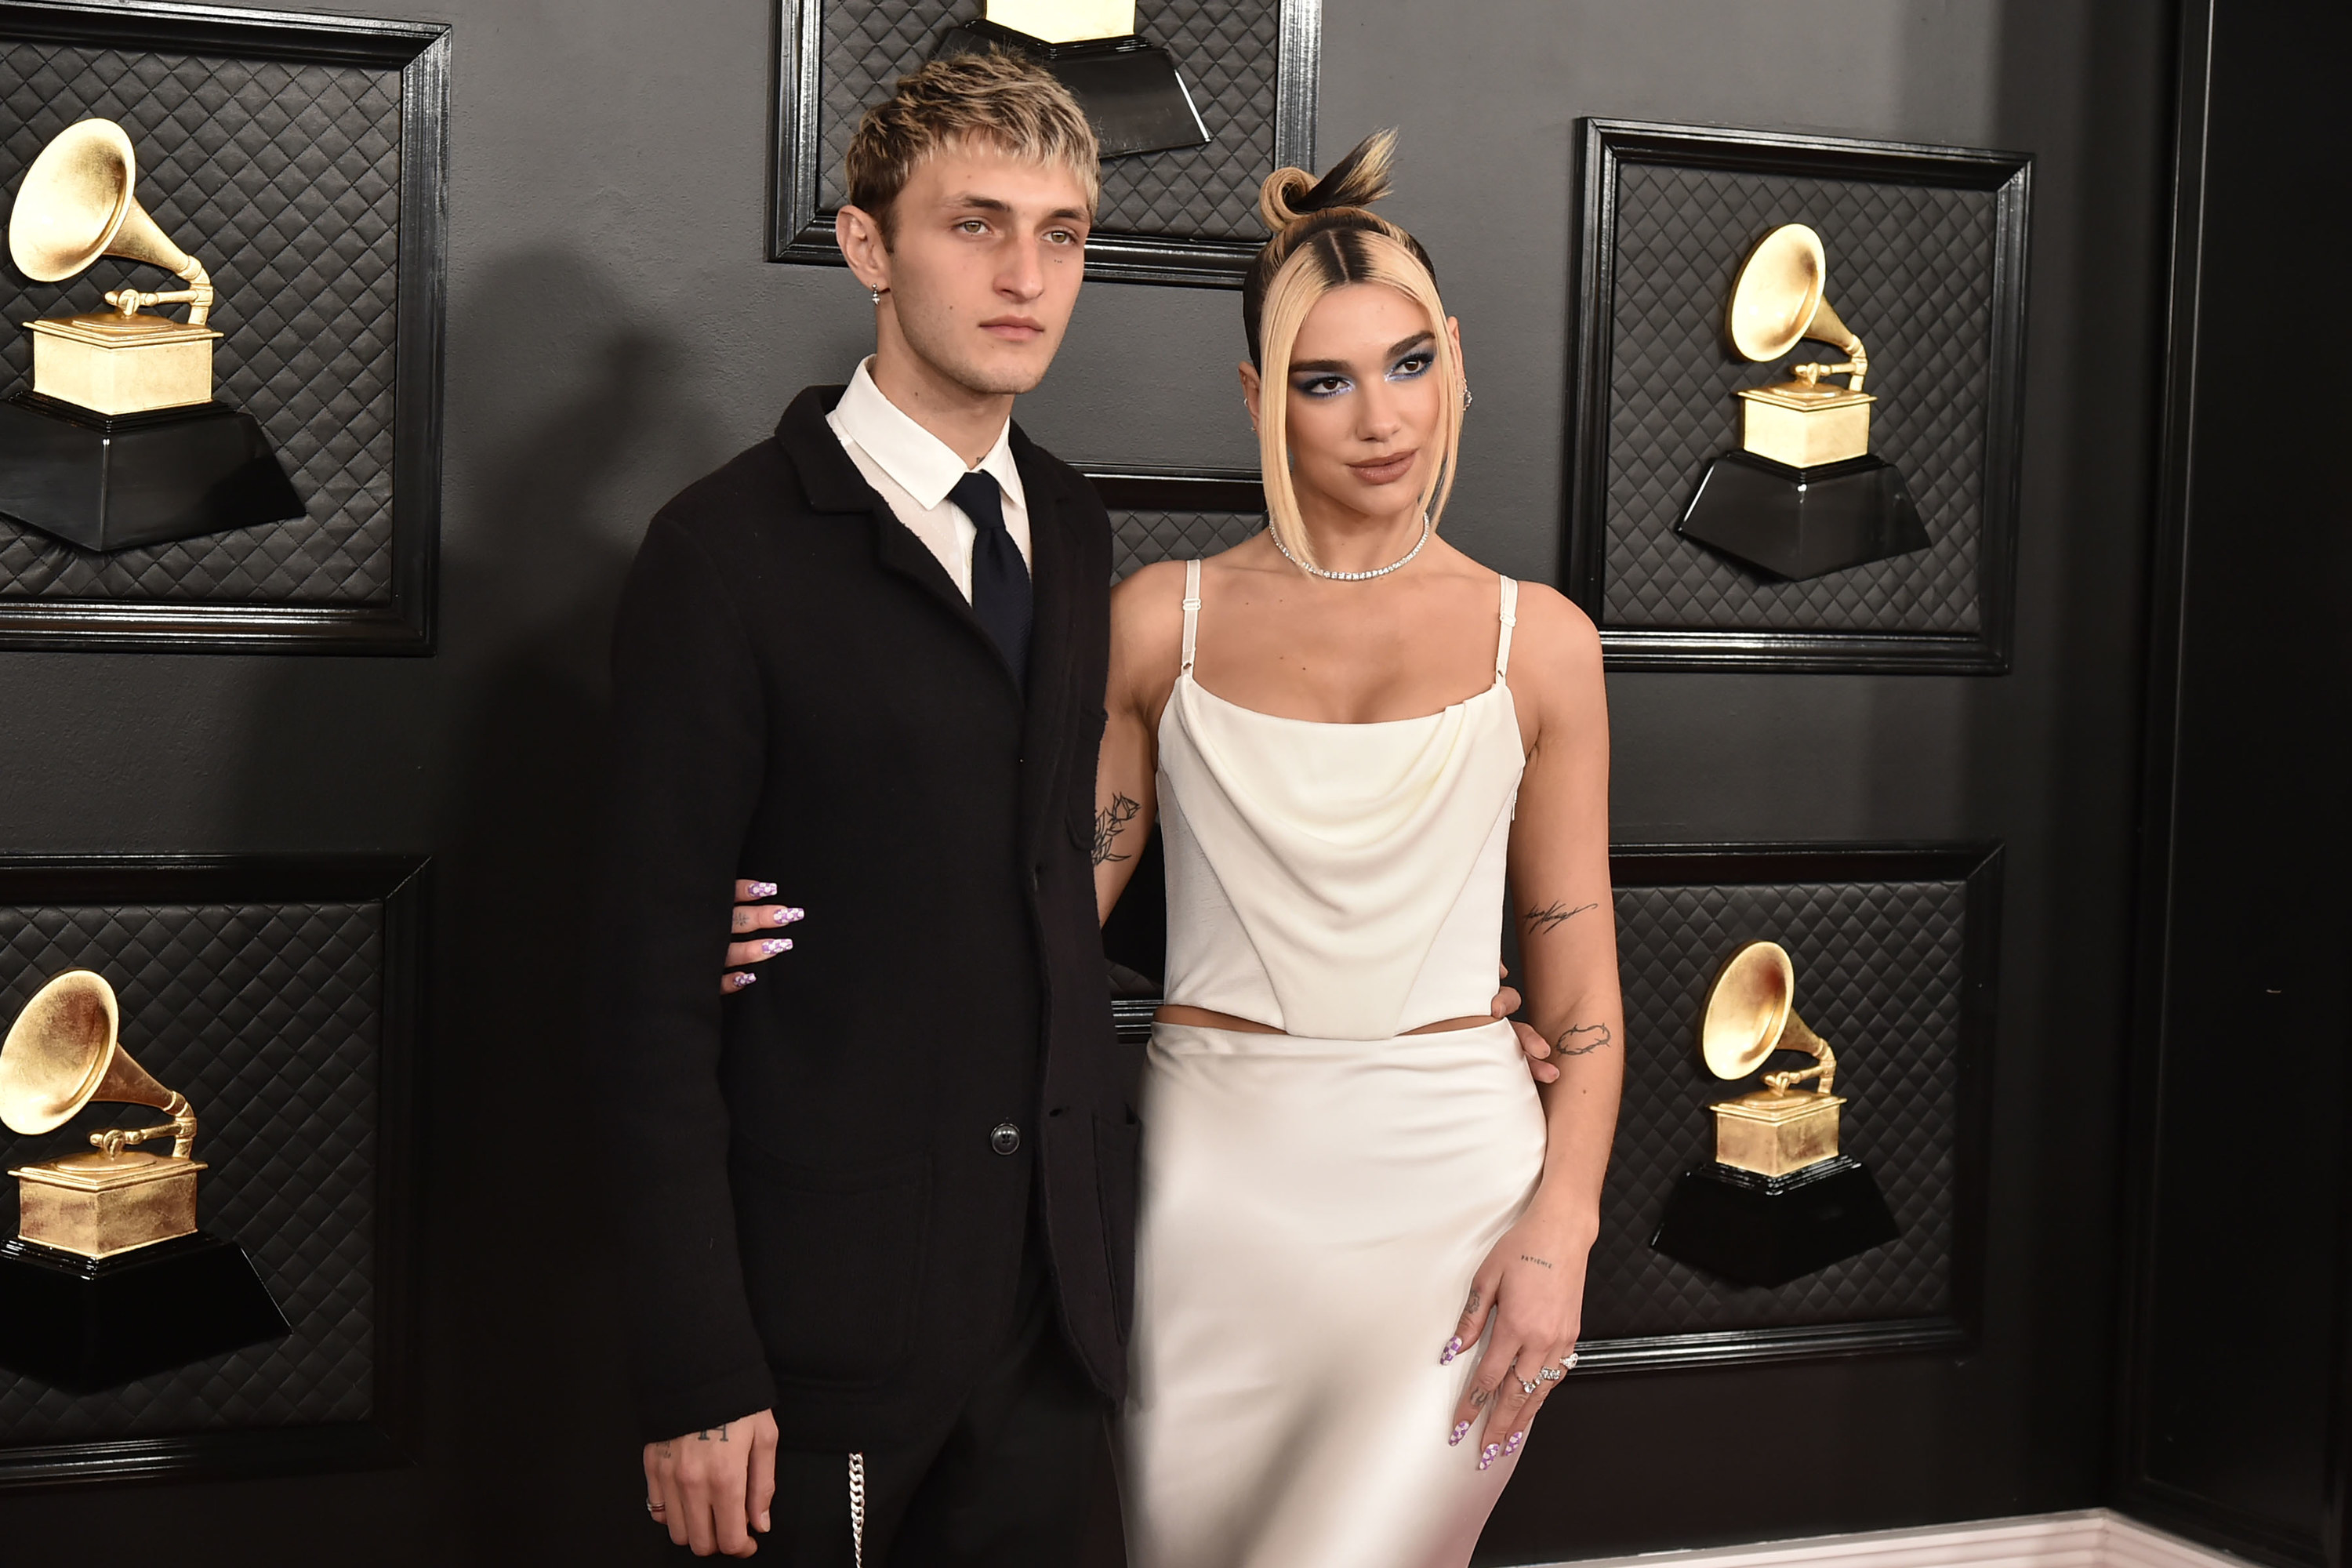 Lipa and Hadid pose for a photo togehter on the Grammys red carpet